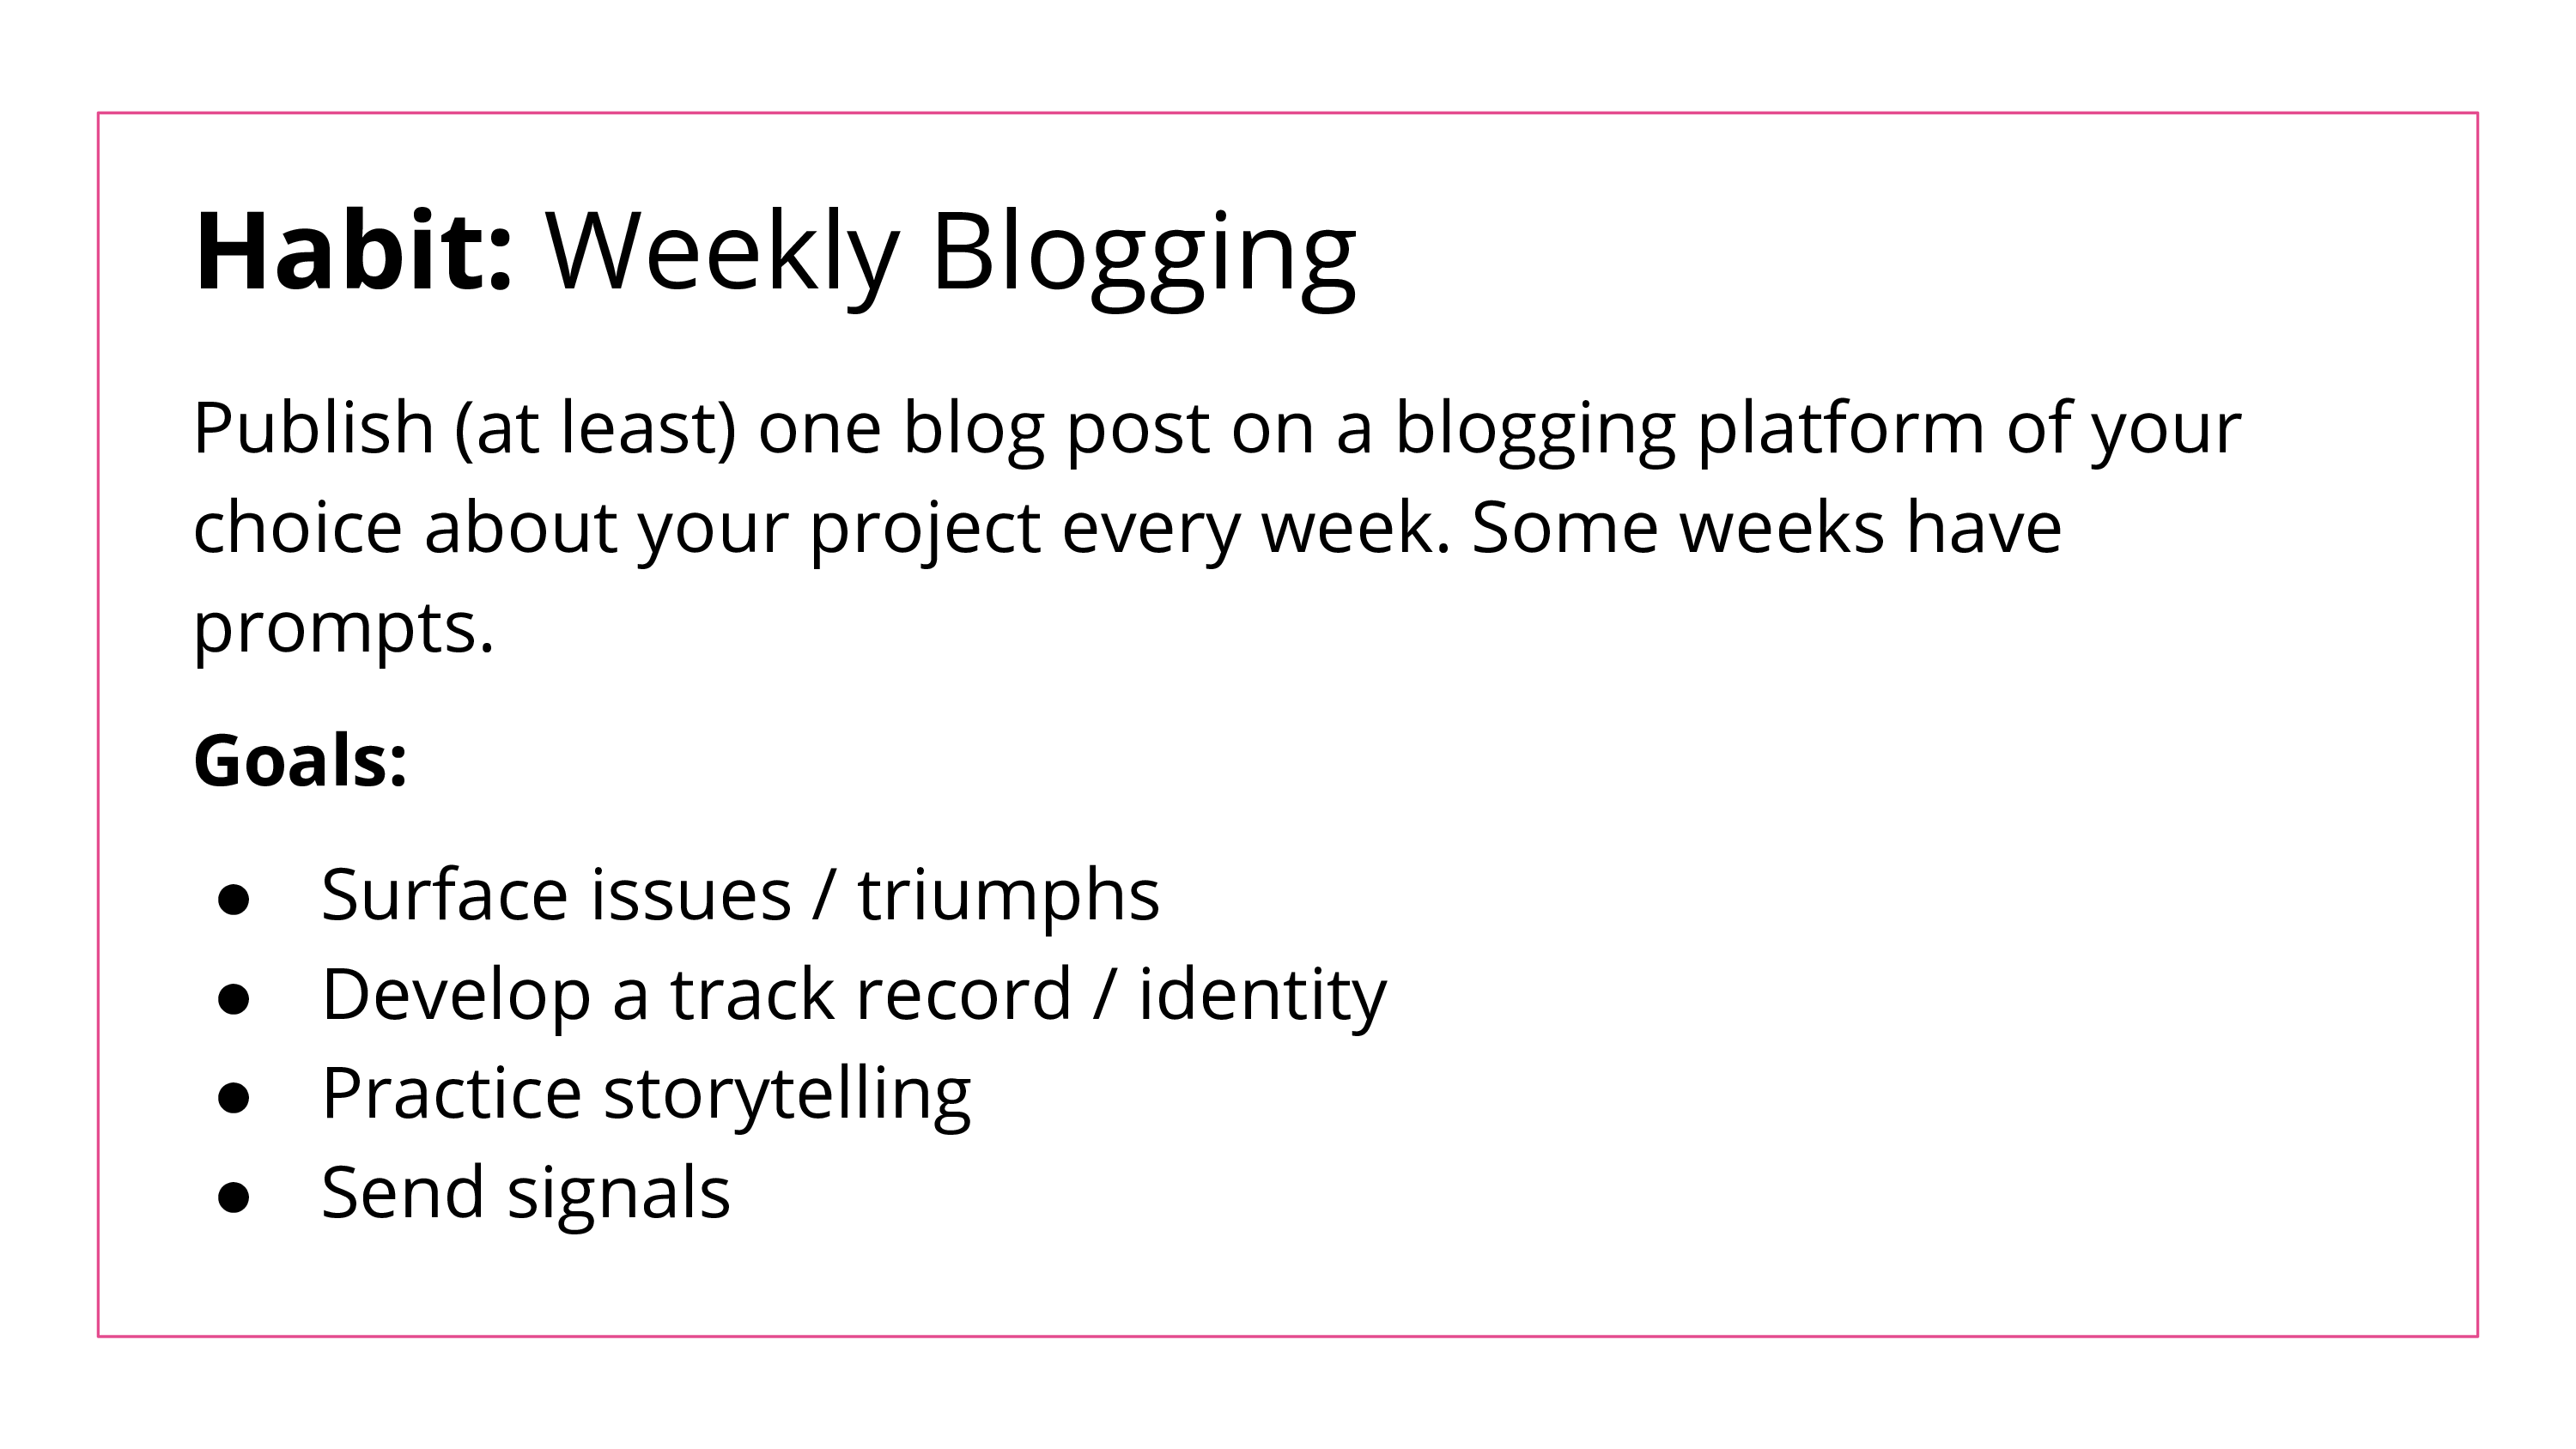 The weekly blogging habit asks students to publish at least one blog post about their work in our class every week, often with prompts. Our goals are to help students surface issues and triumphs, develop a track record and online identity, practice storytelling, and hone signals.